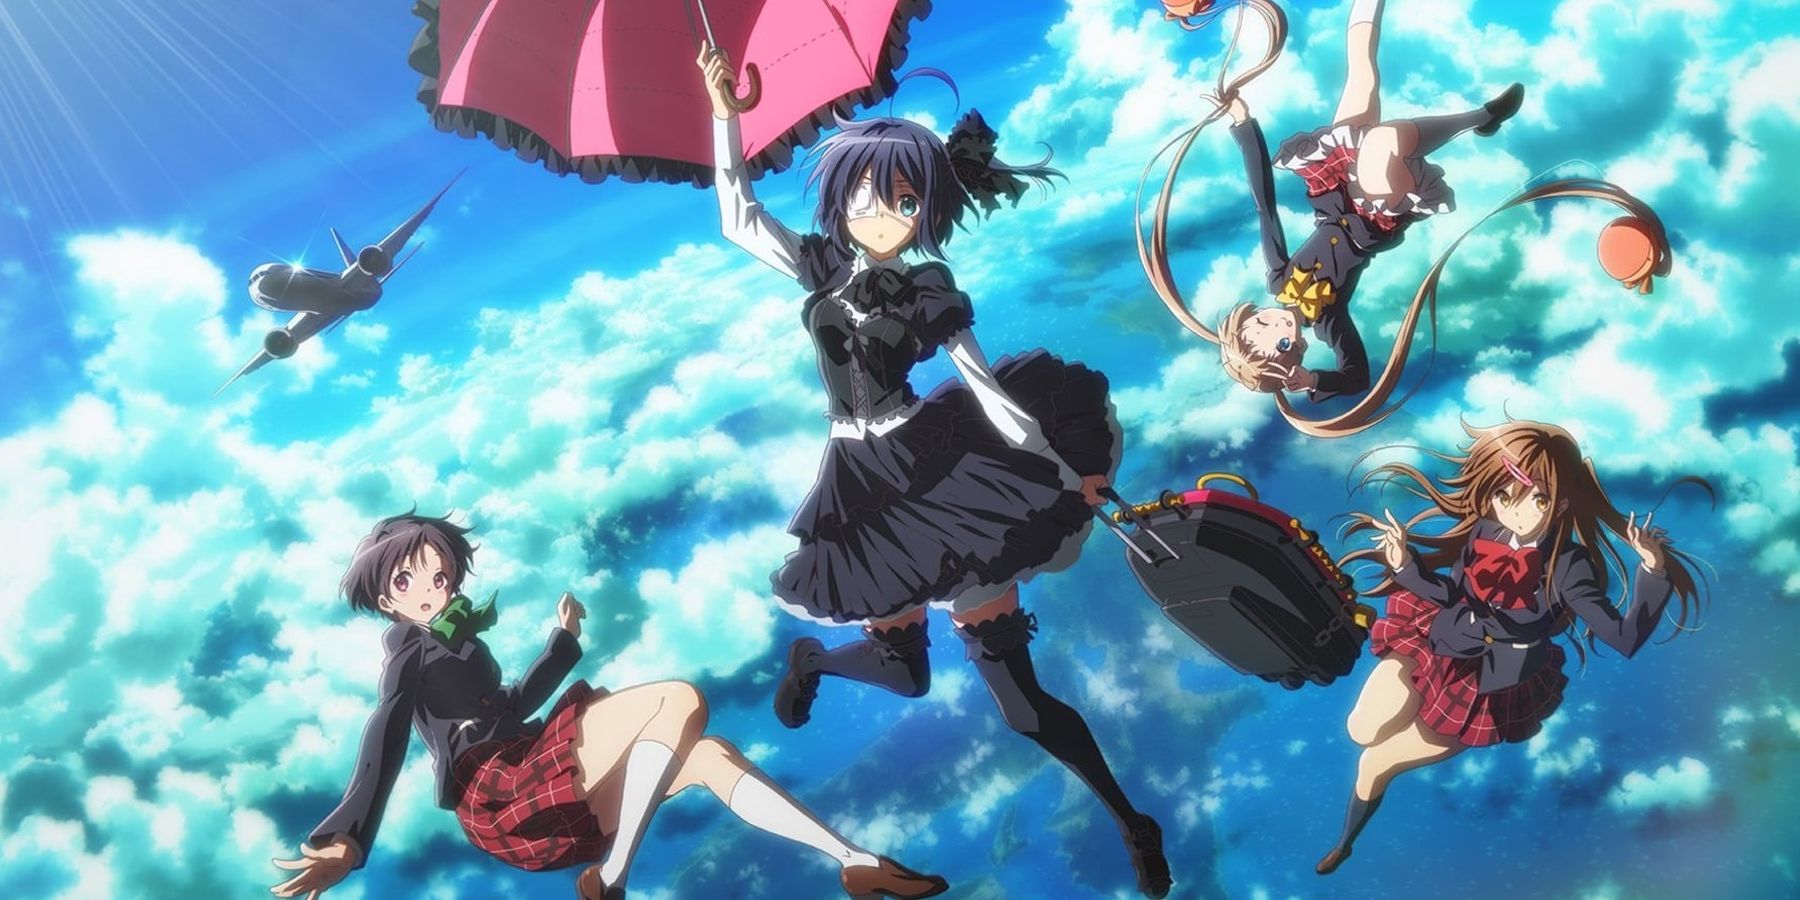 Love, Chunibyo & Other Delusions Take On Me